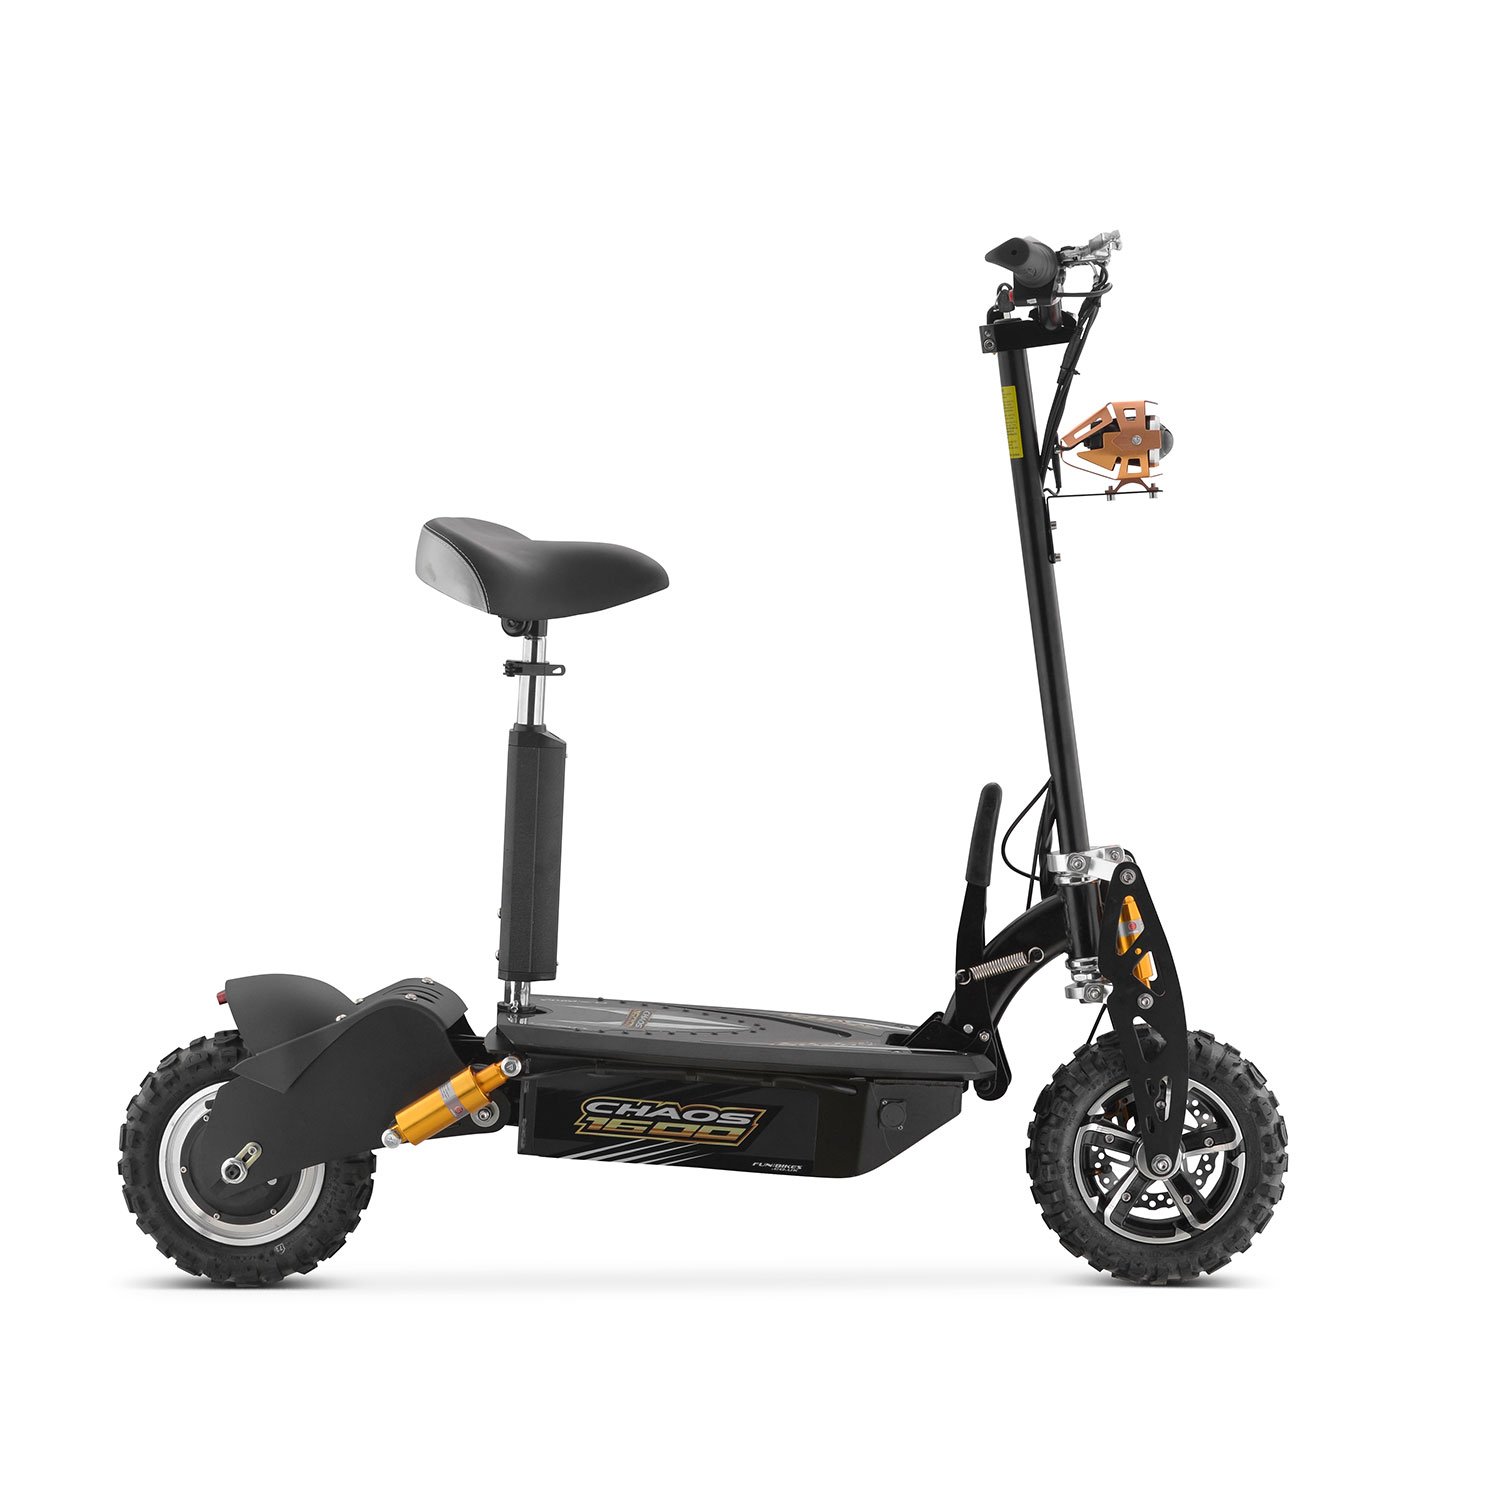 48v 1600w Hub Drive Off Road Adult Electric Scooter